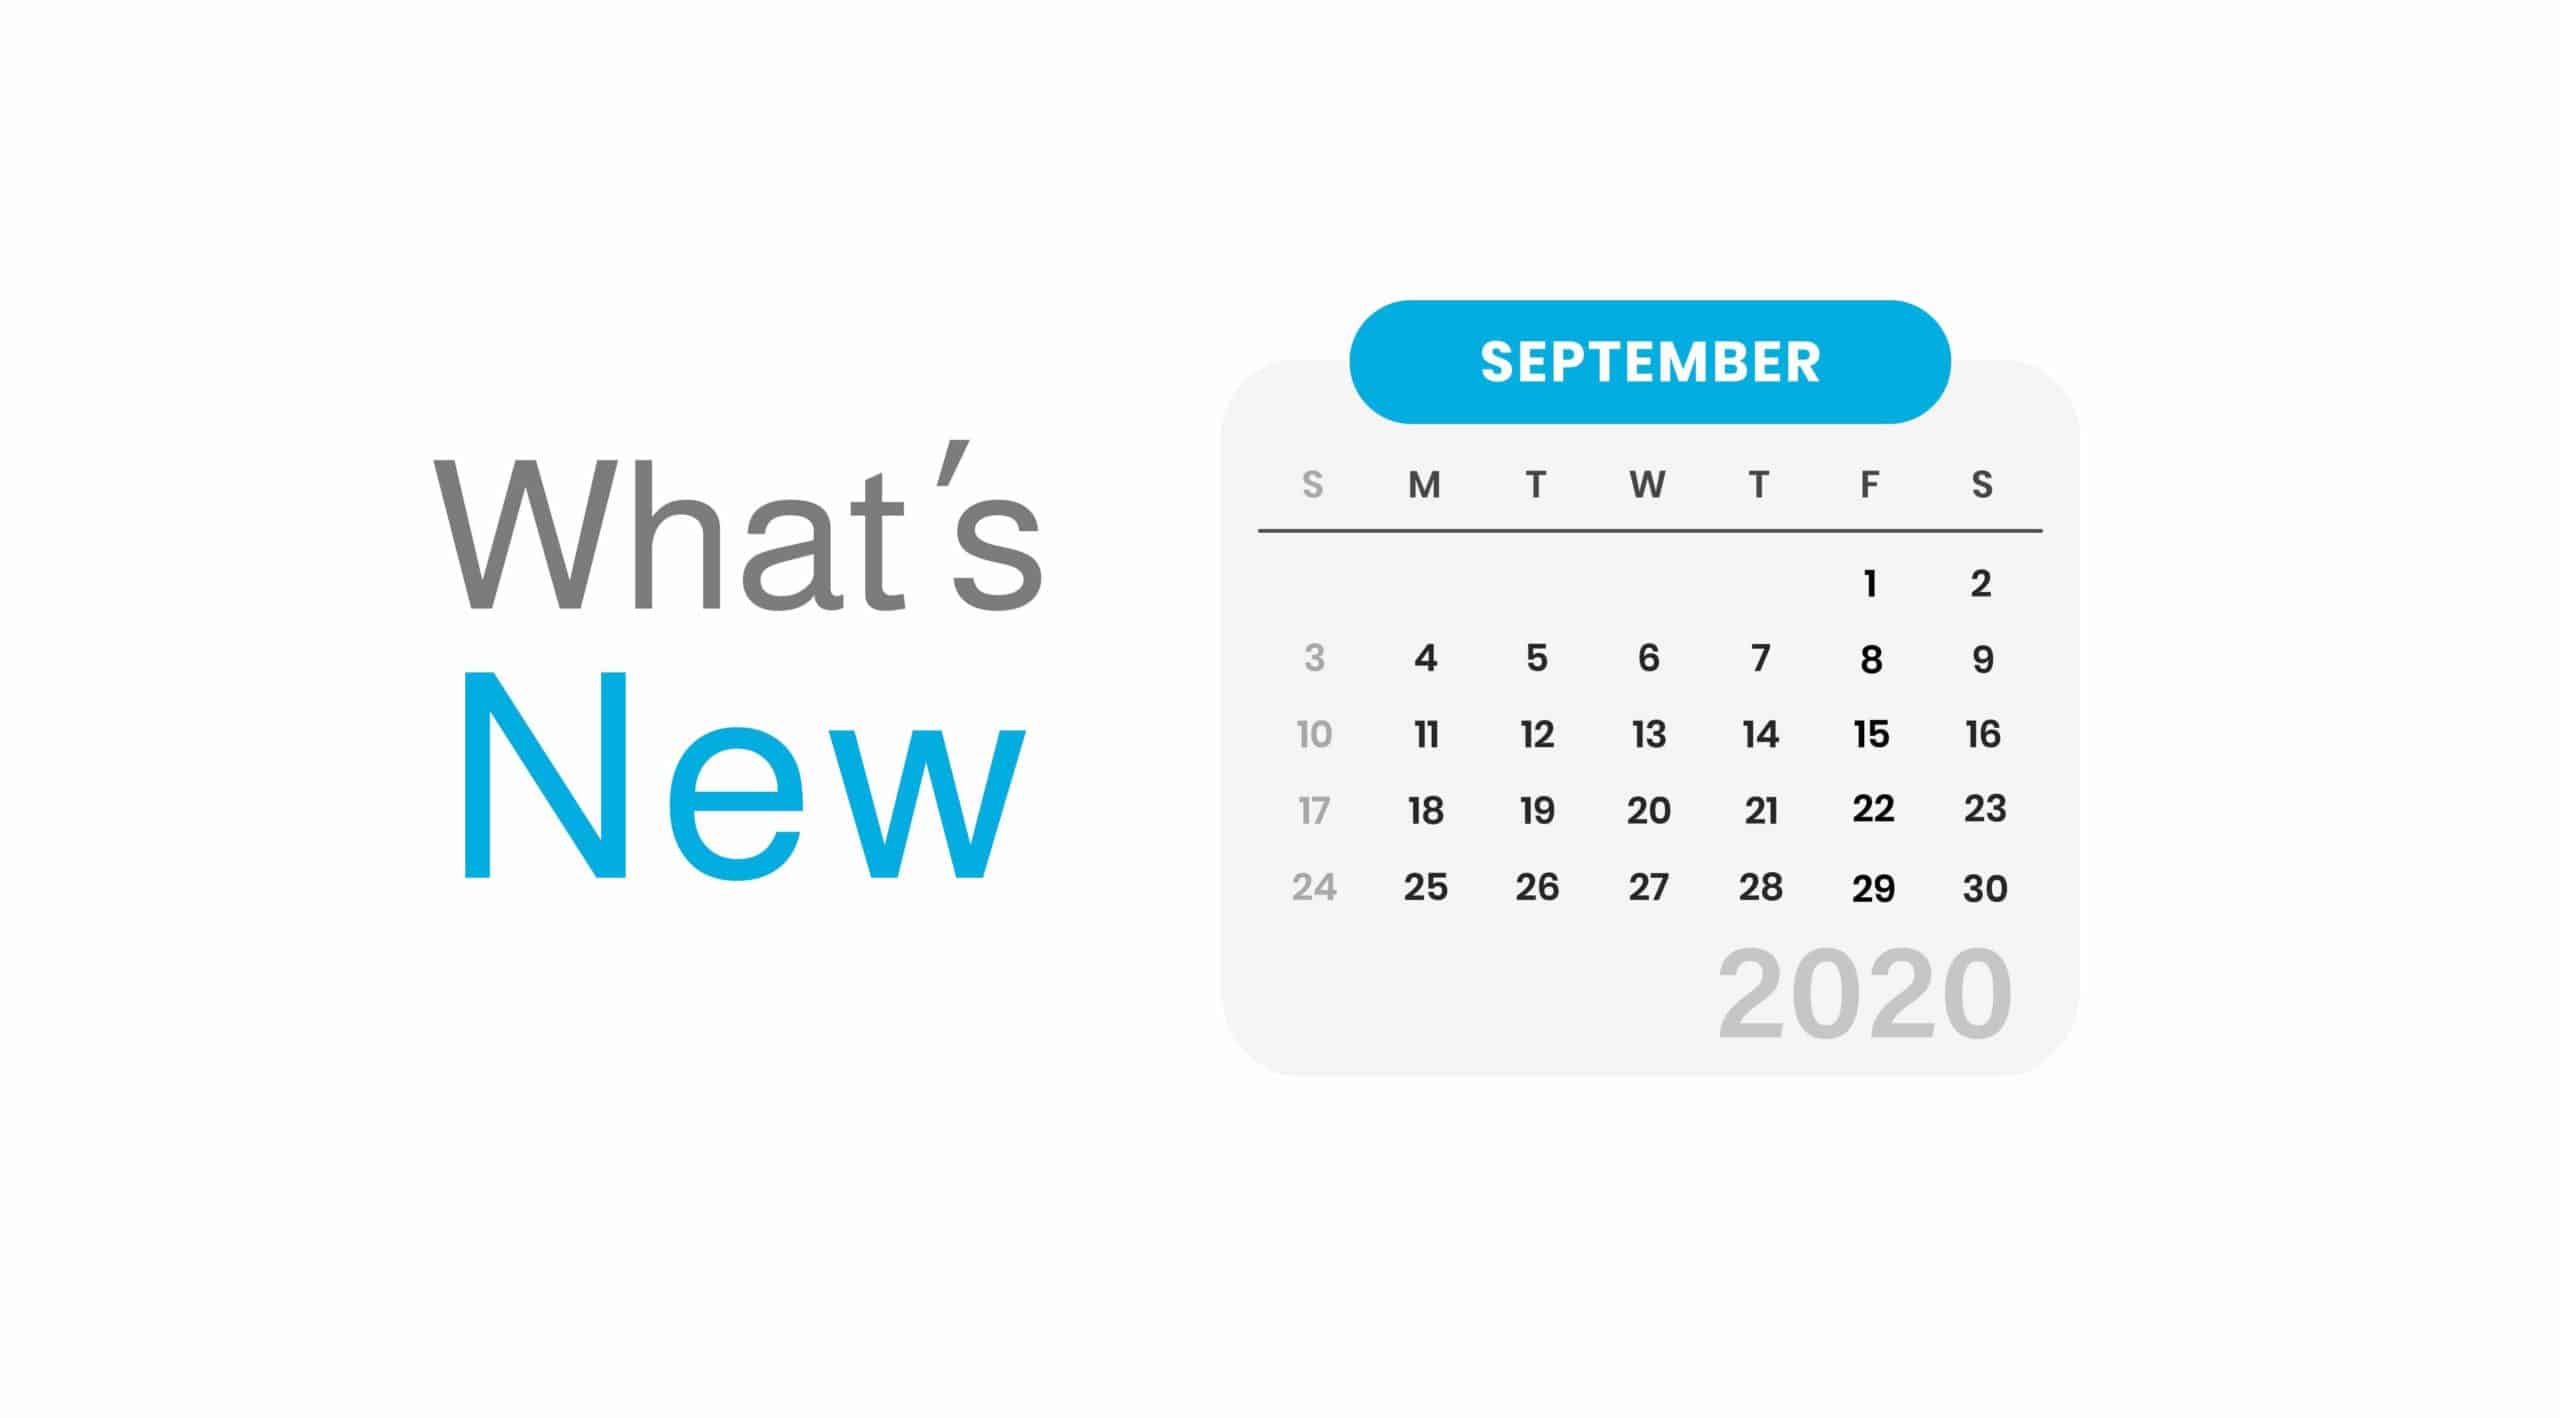 September 2020 updates: Empowering Efficiency and Transparency with Edara